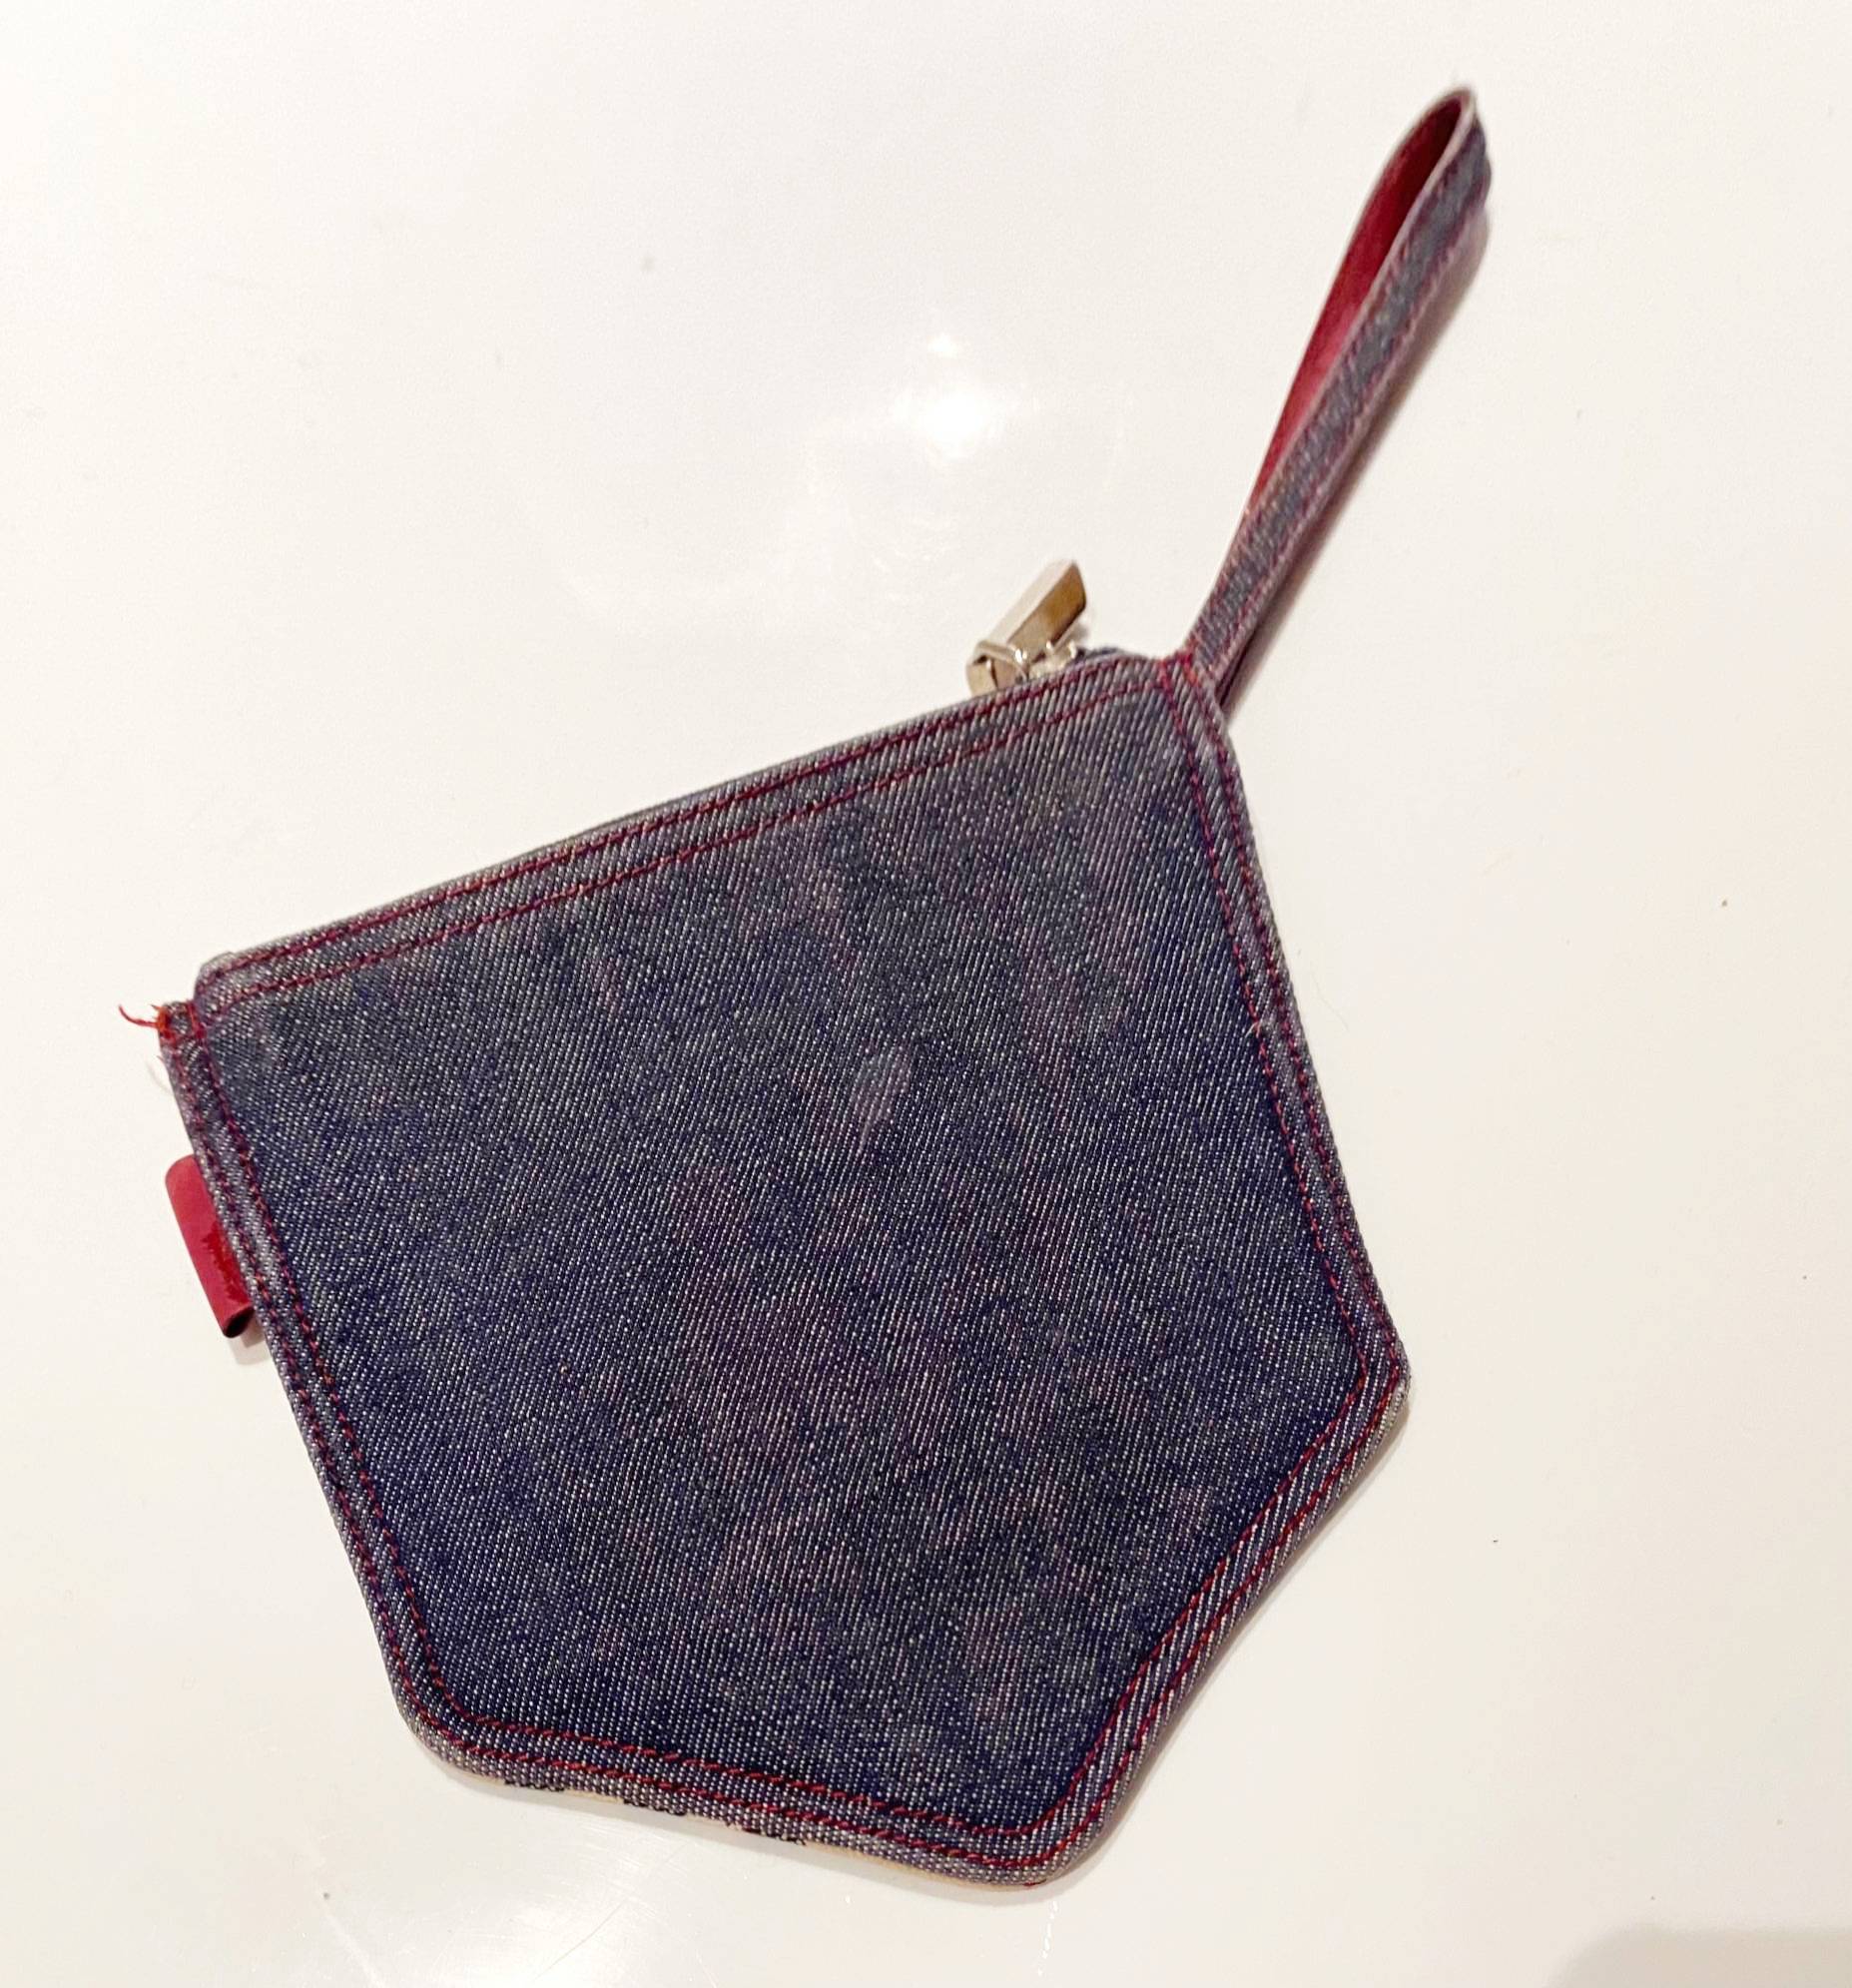 1990s Burberry Pocket Shaped Wristlet Pouch - style - CHNGR